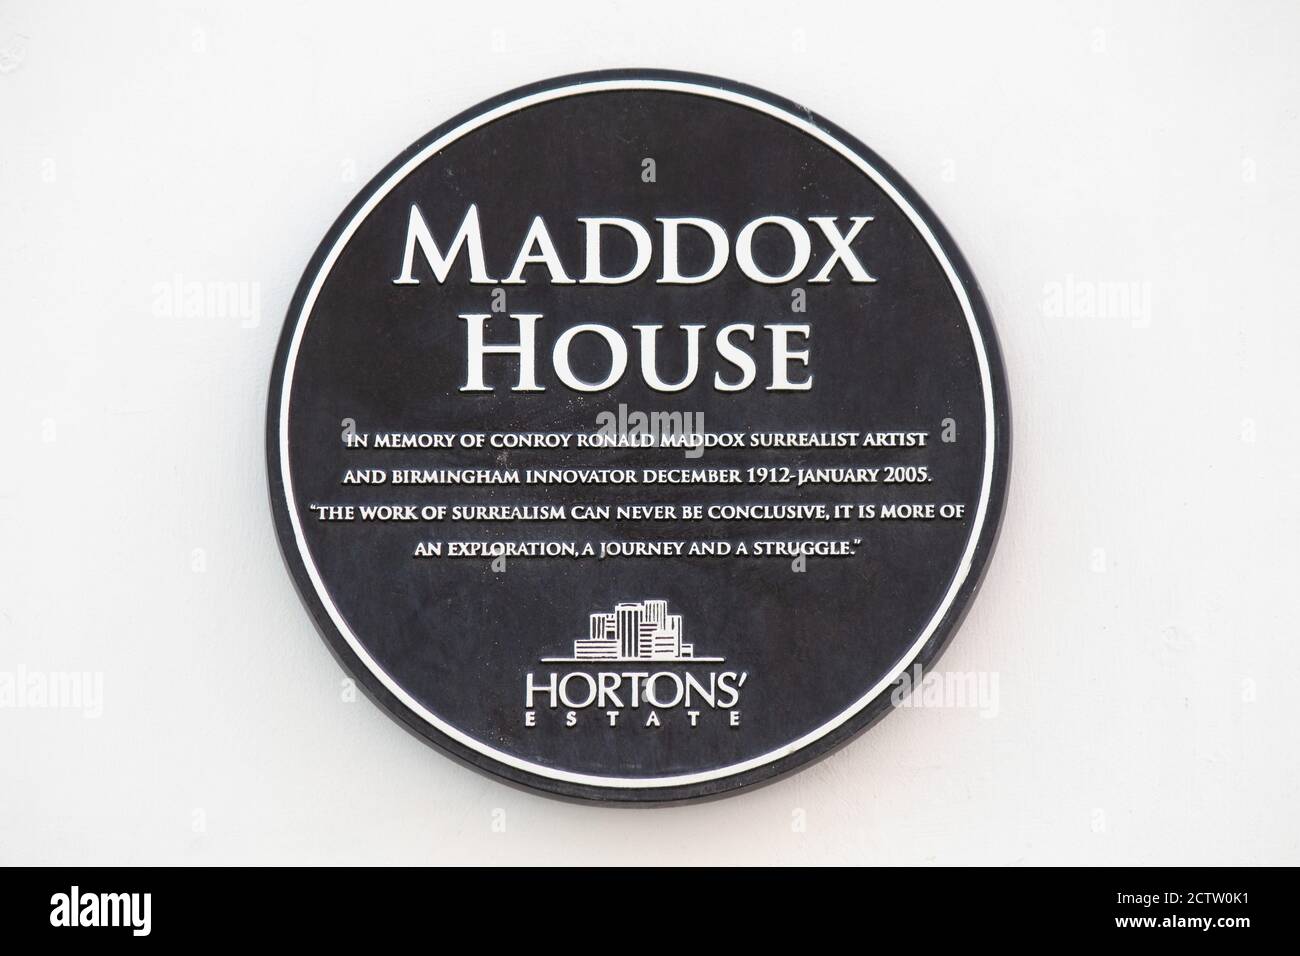 A blue plaque in Edmund Street, Birmingham in the memory of Conroy Maddox. Conroy Maddox (27 December 1912 – 14 January 2005) was an English surrealist painter, collagist, writer and lecturer; and a key figure in the Birmingham Surrealist movement. The plaque in Edmund Street is on part of the Hortons Estate who own a large number of properties in that area of Birmingham. Stock Photo